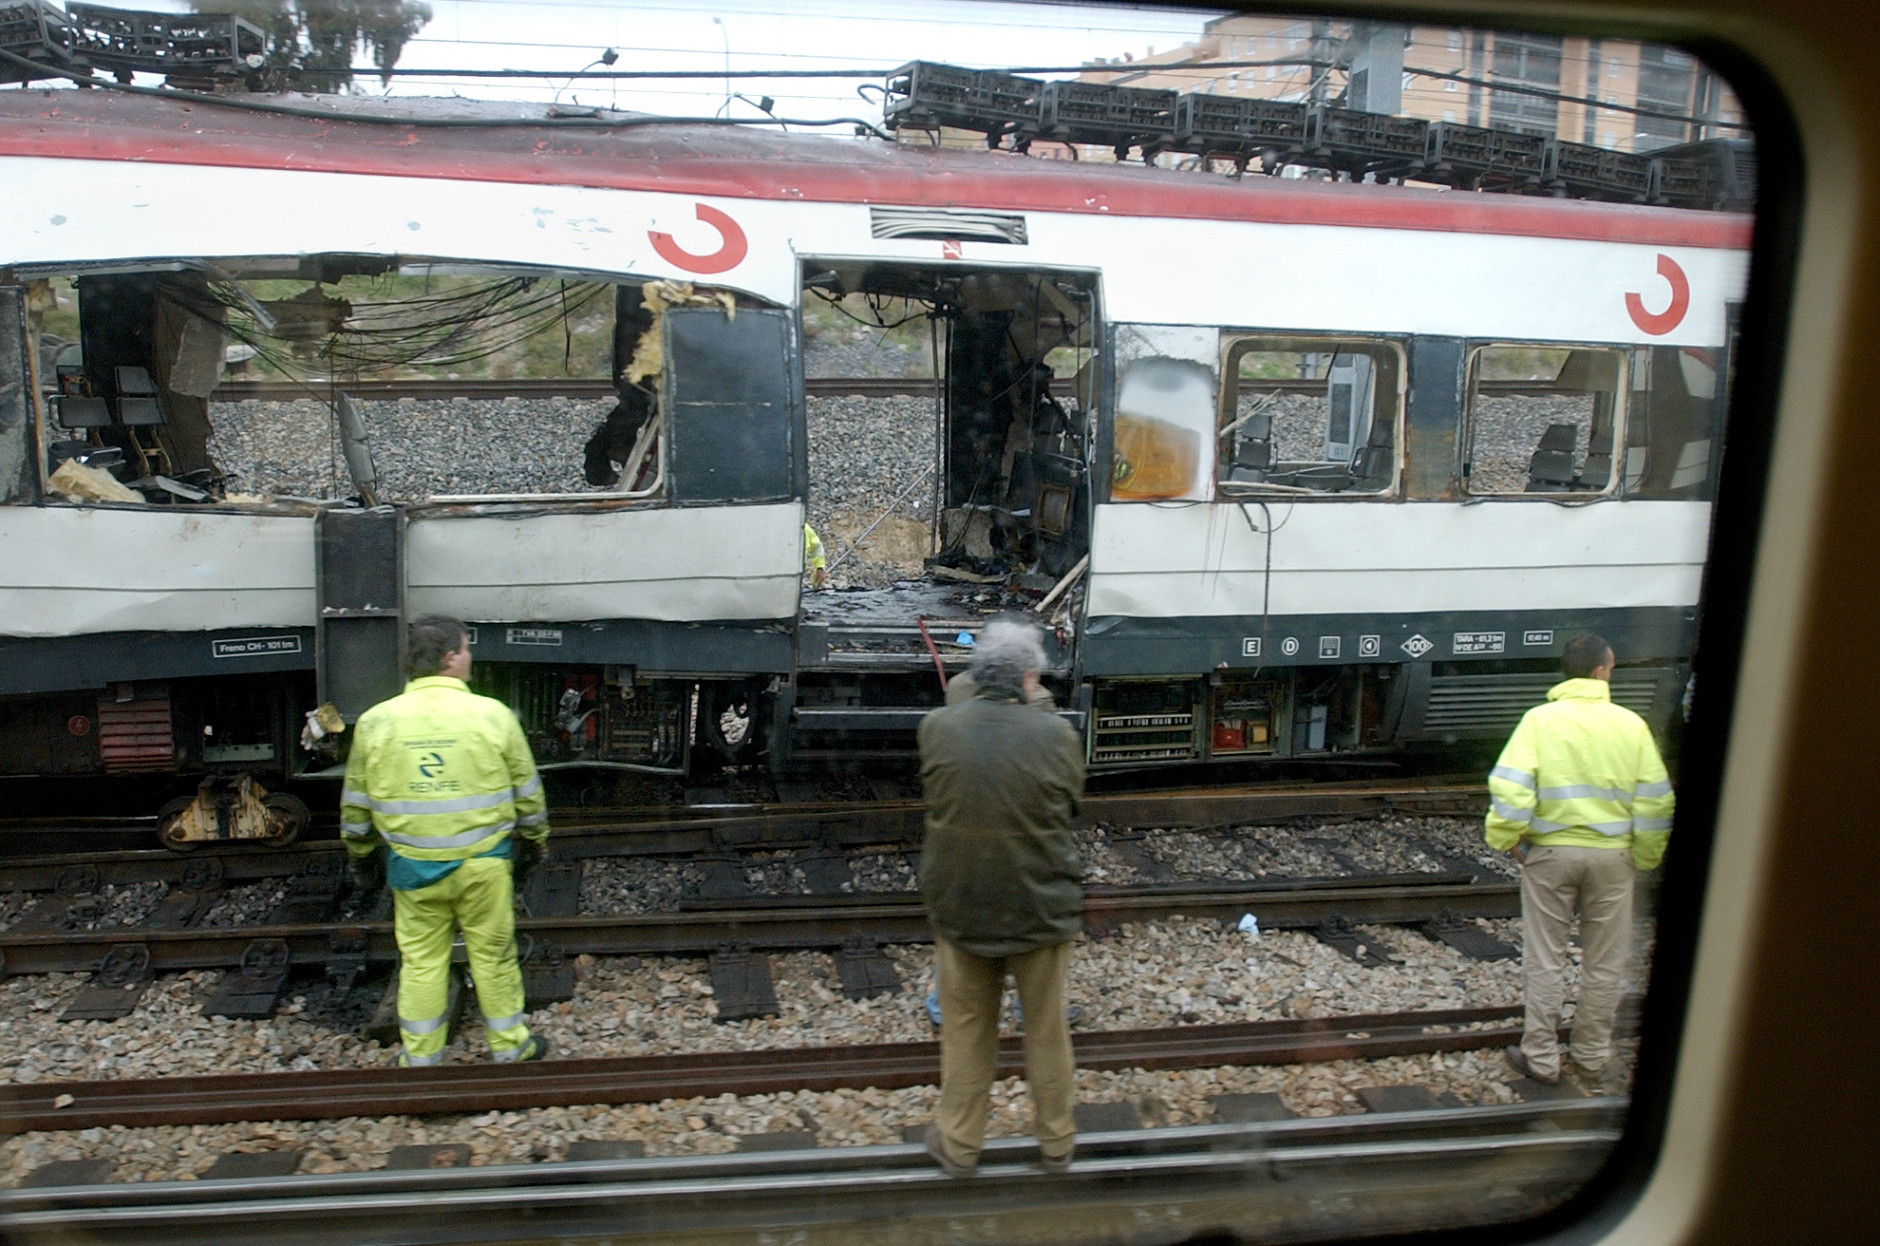 Workers stand next to a bomb damaged passenger train a day after a number of explosions  in Madrid, in this March 12, 2004, file photo. A Spanish judge on Tuesday, April 11, 2006, handed down the first indictments in the Madrid train bombings of 2004, charging 29 people with murder, terrorism or other crimes after a two-year probe. (AP Photo/Peter DeJong)